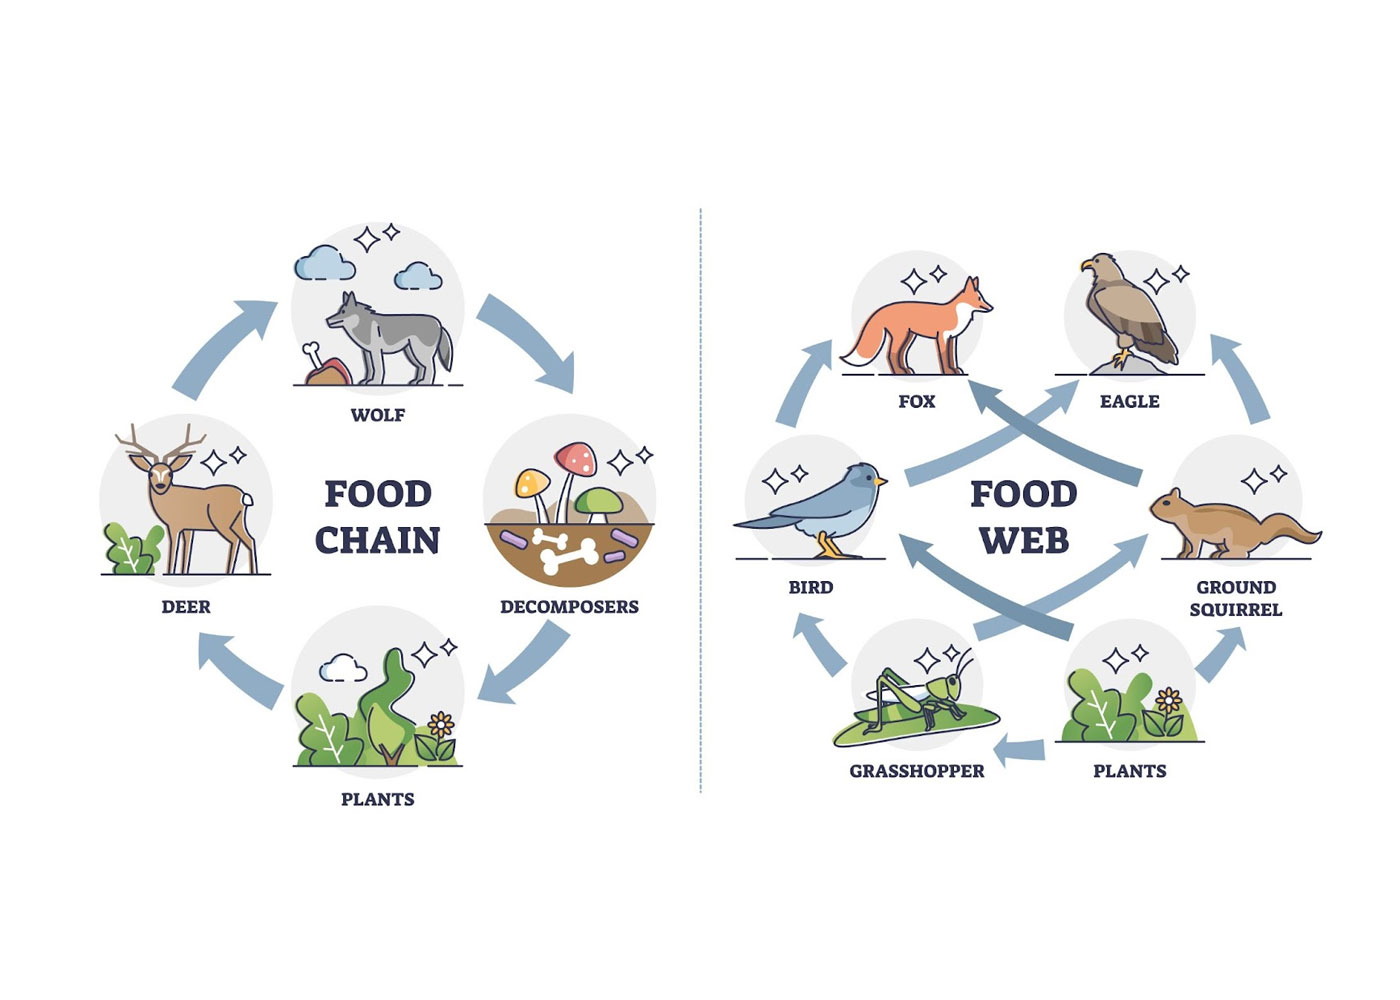 Exploring the Core Difference between Food Chains and Food Webs